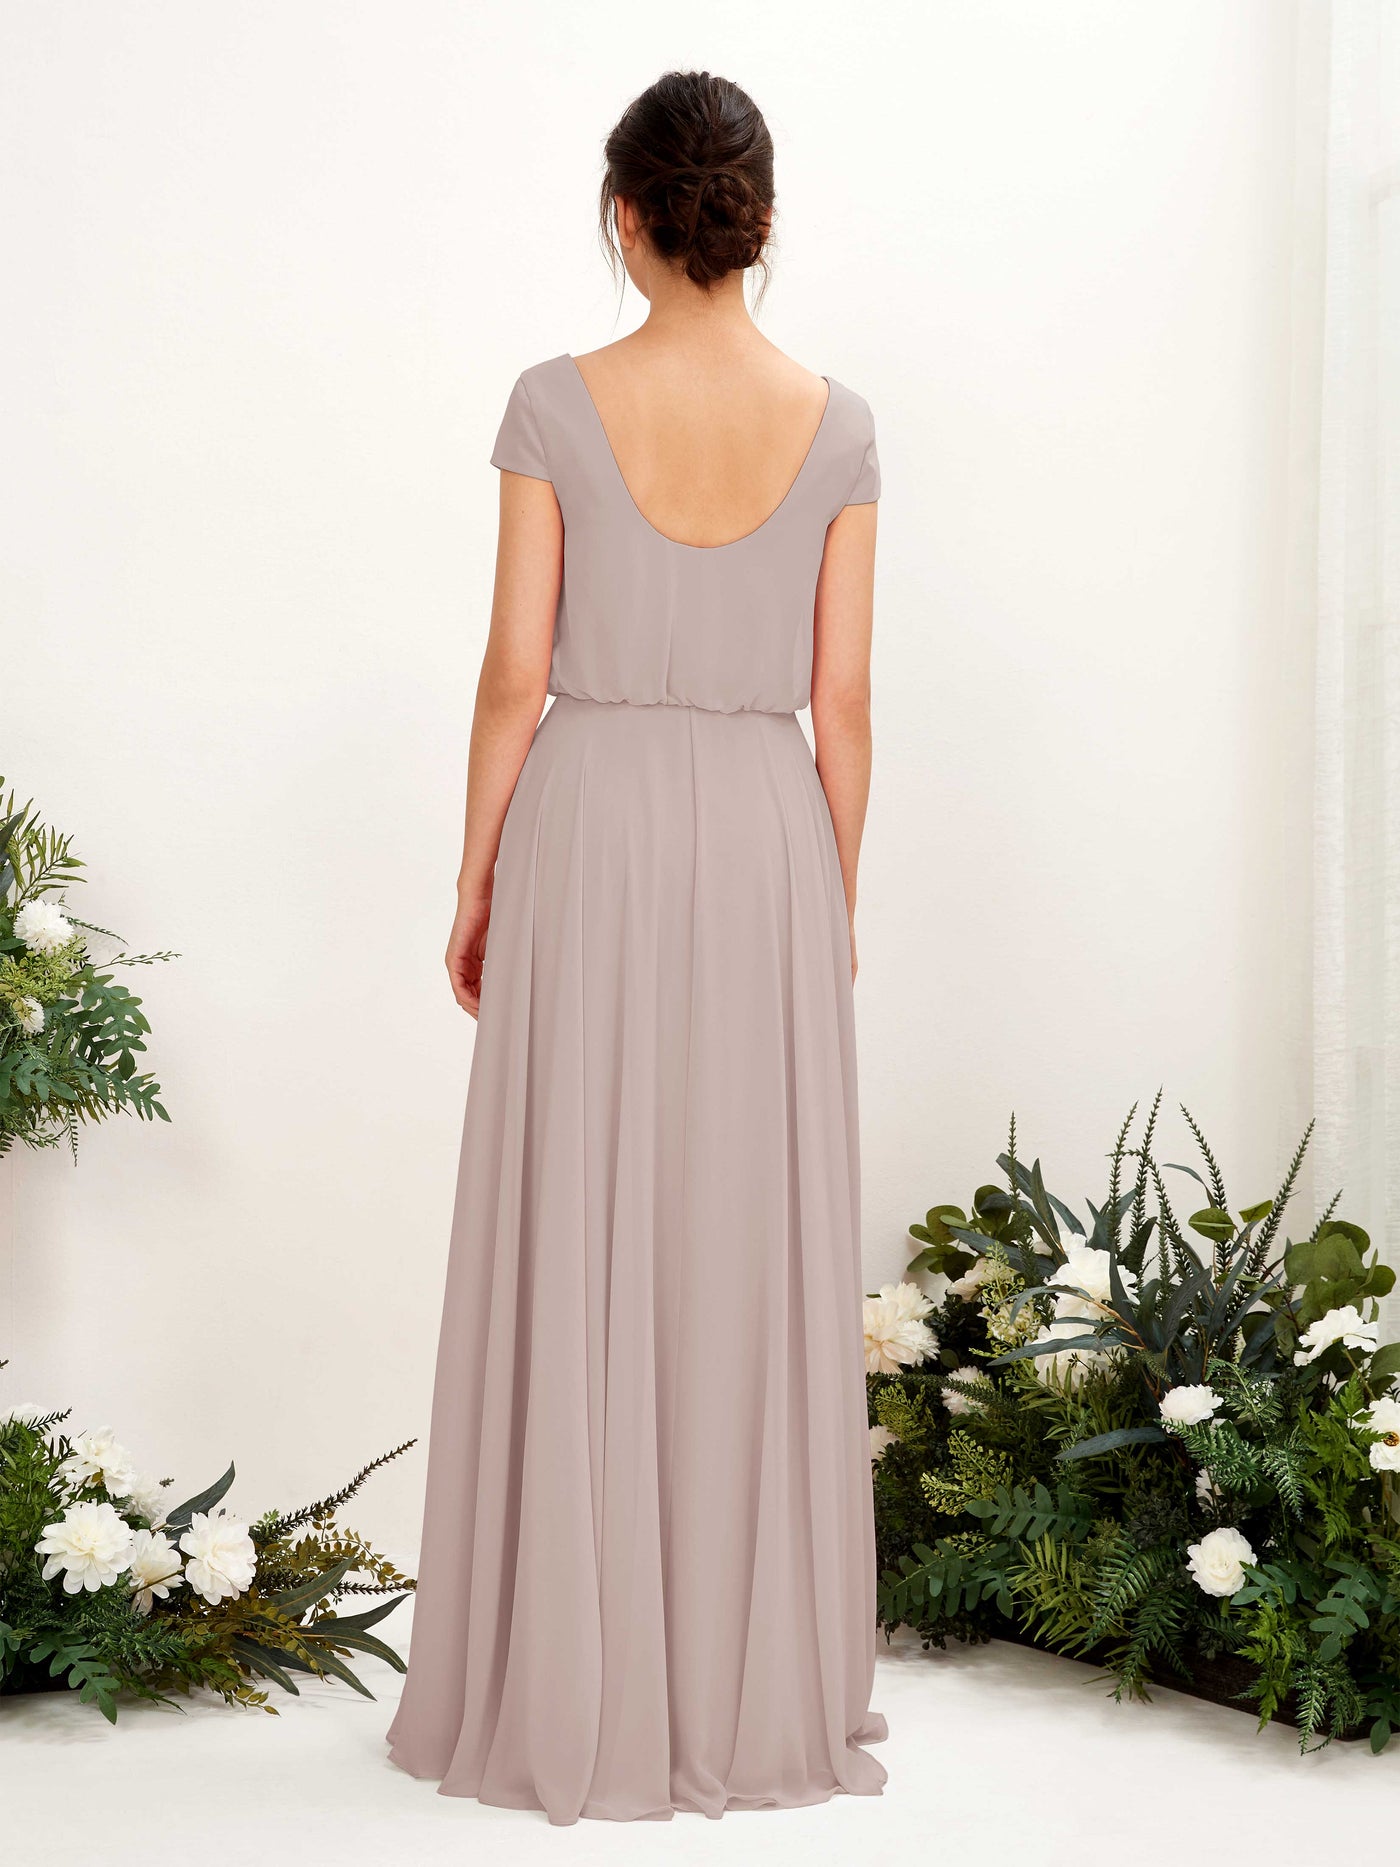 Taupe Bridesmaid Dresses Bridesmaid Dress A-line Chiffon V-neck Full Length Short Sleeves Wedding Party Dress (81221824)#color_taupe